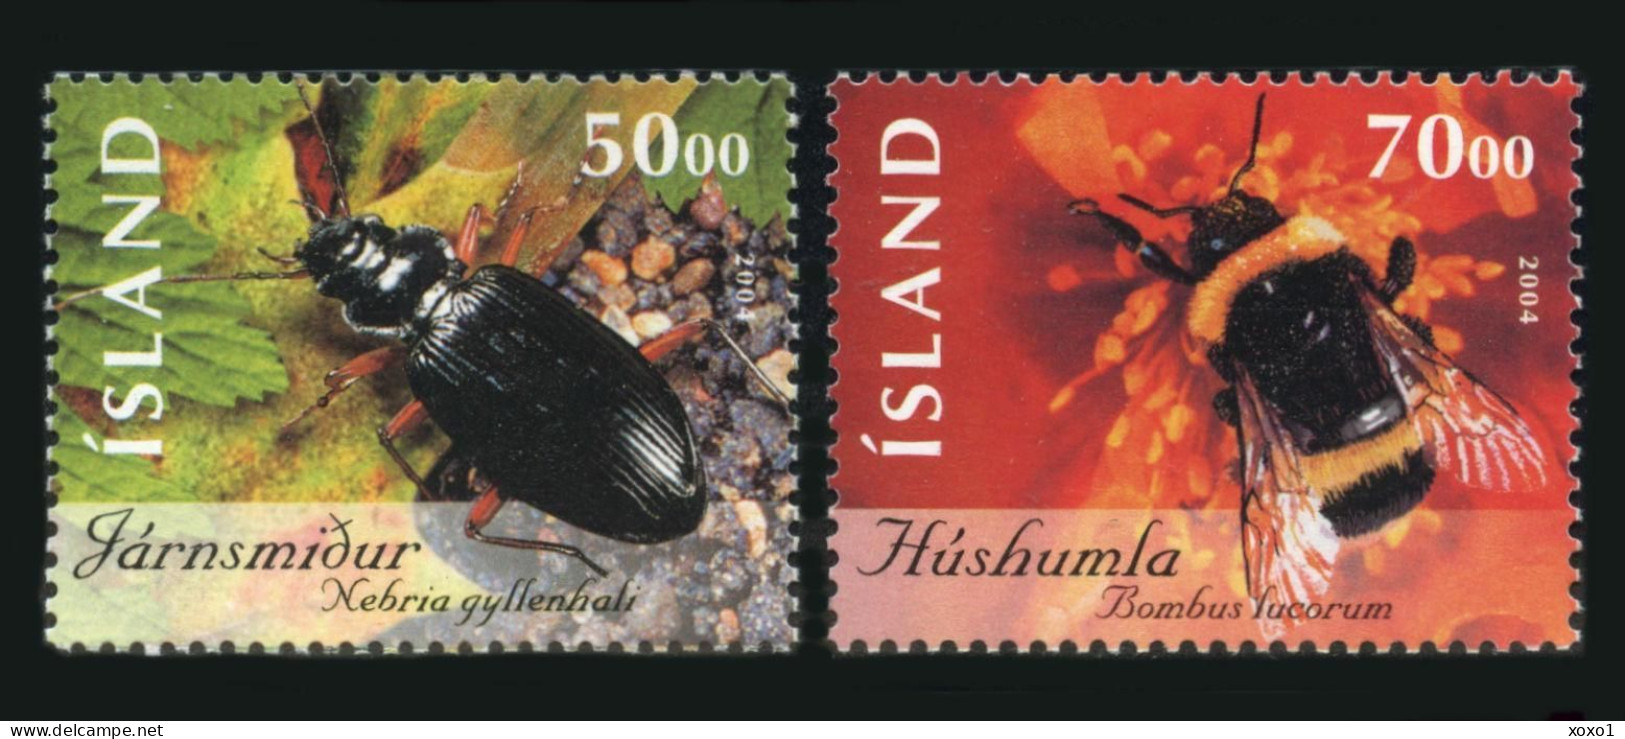 Iceland 2004 MiNr. 1075 - 1076 Island Insects And Spiders  # 1     2v  MNH** 3.50 € - Nuevos